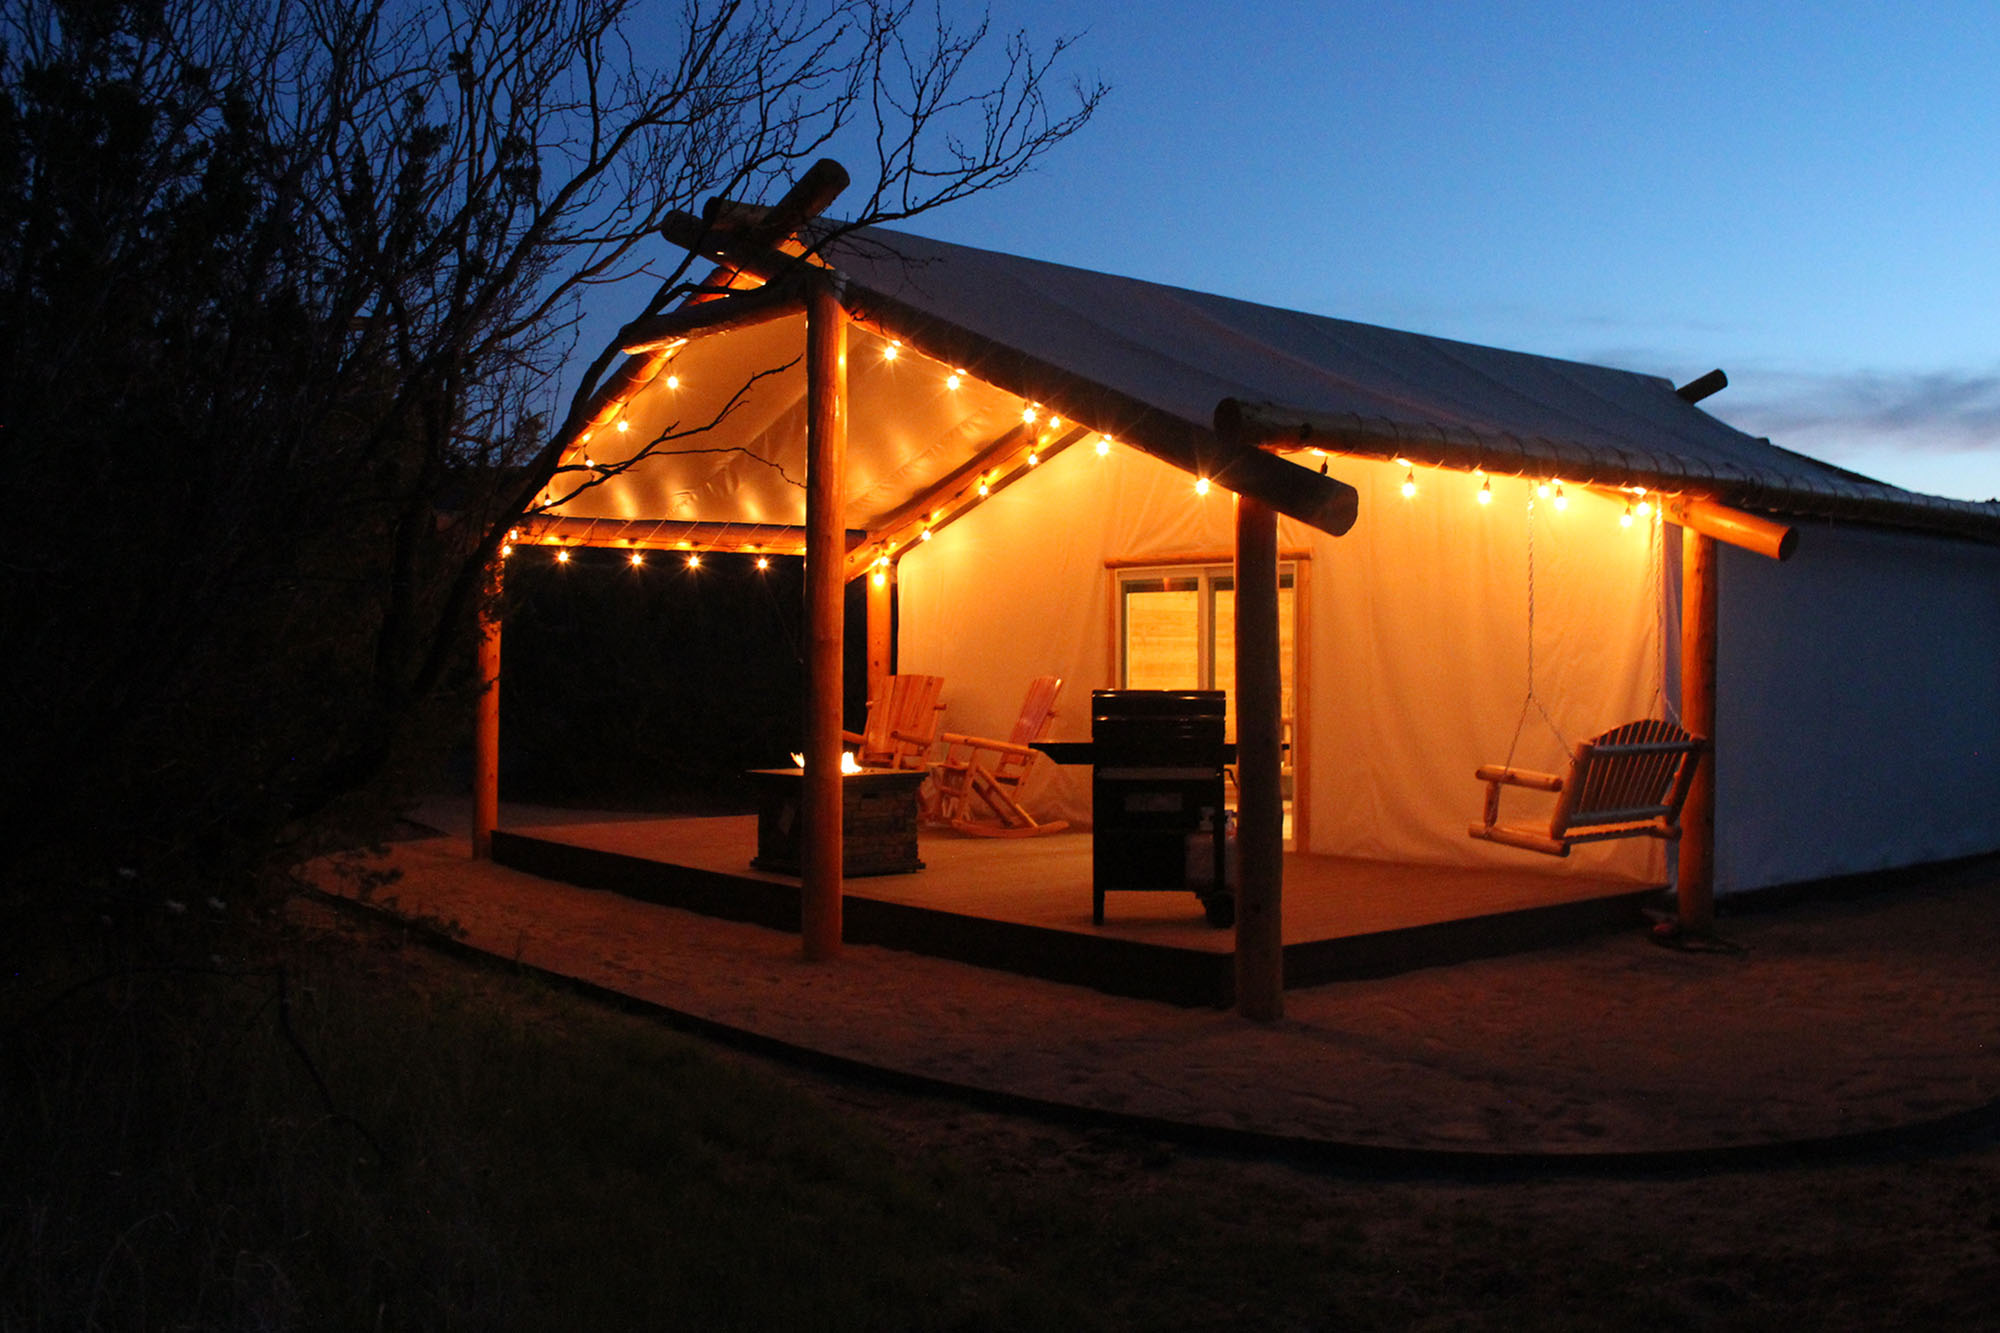 A nighttime shot of one of the glamping cabins shows lit string lights, a grill, and seating on a large porch. 